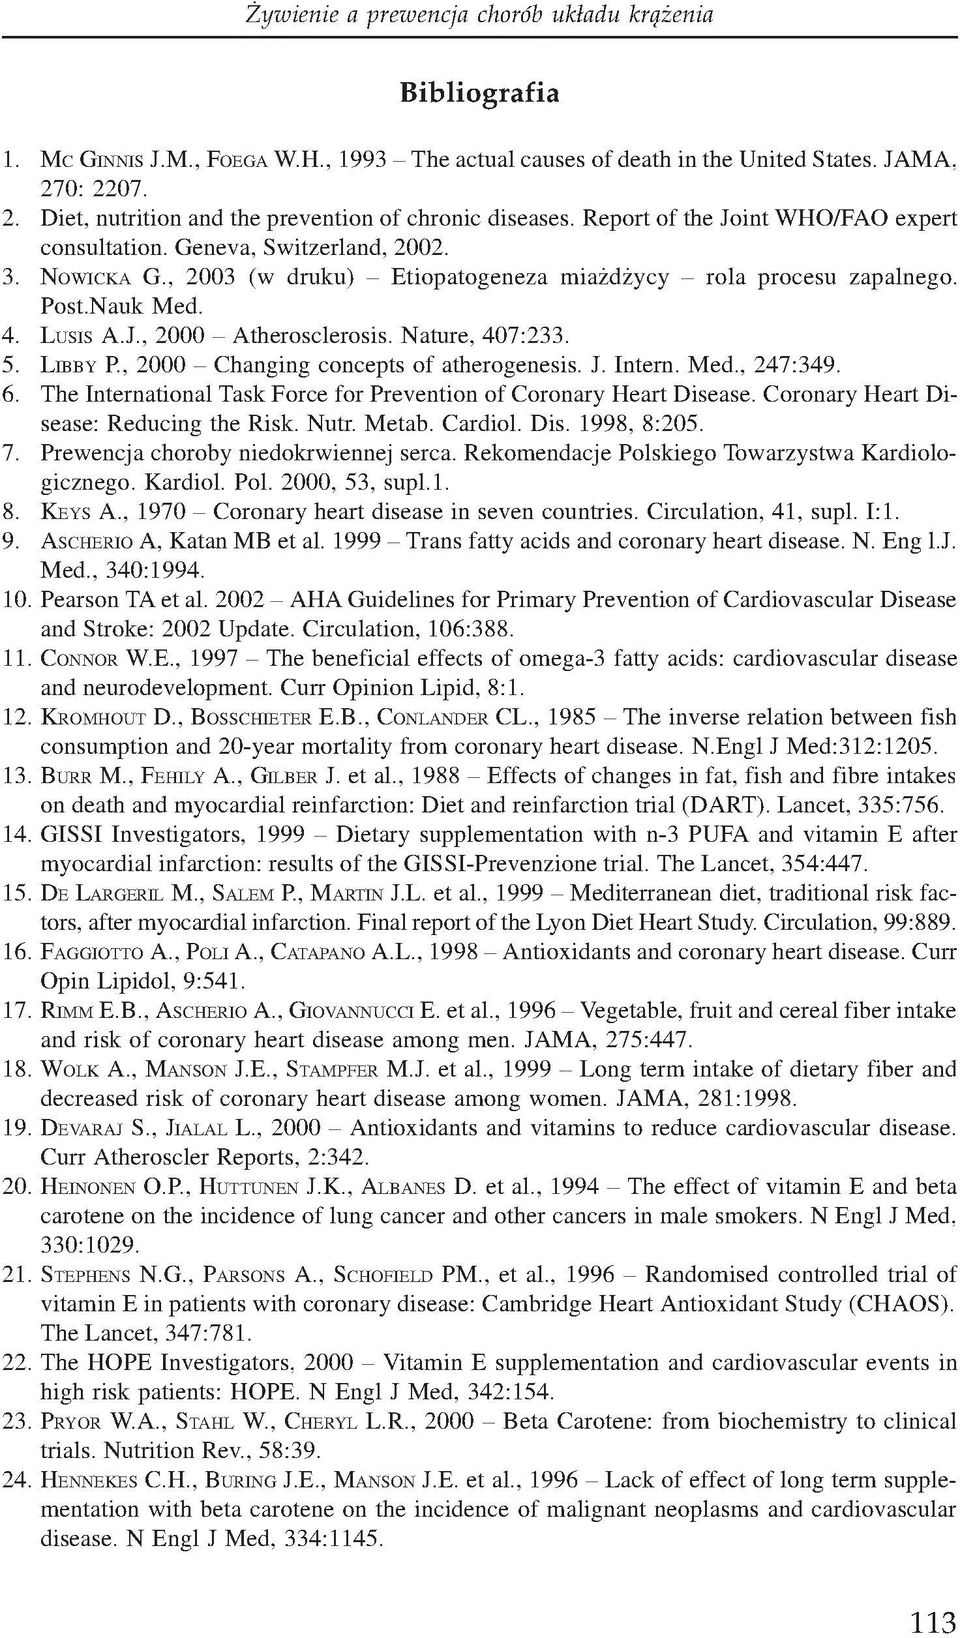 Nature, 407:233. 5. Lib b y P., 2000 - Changing concepts of atherogenesis. J. Intern. Med., 247:349. 6. The International Task Force for Prevention of Coronary Heart Disease.